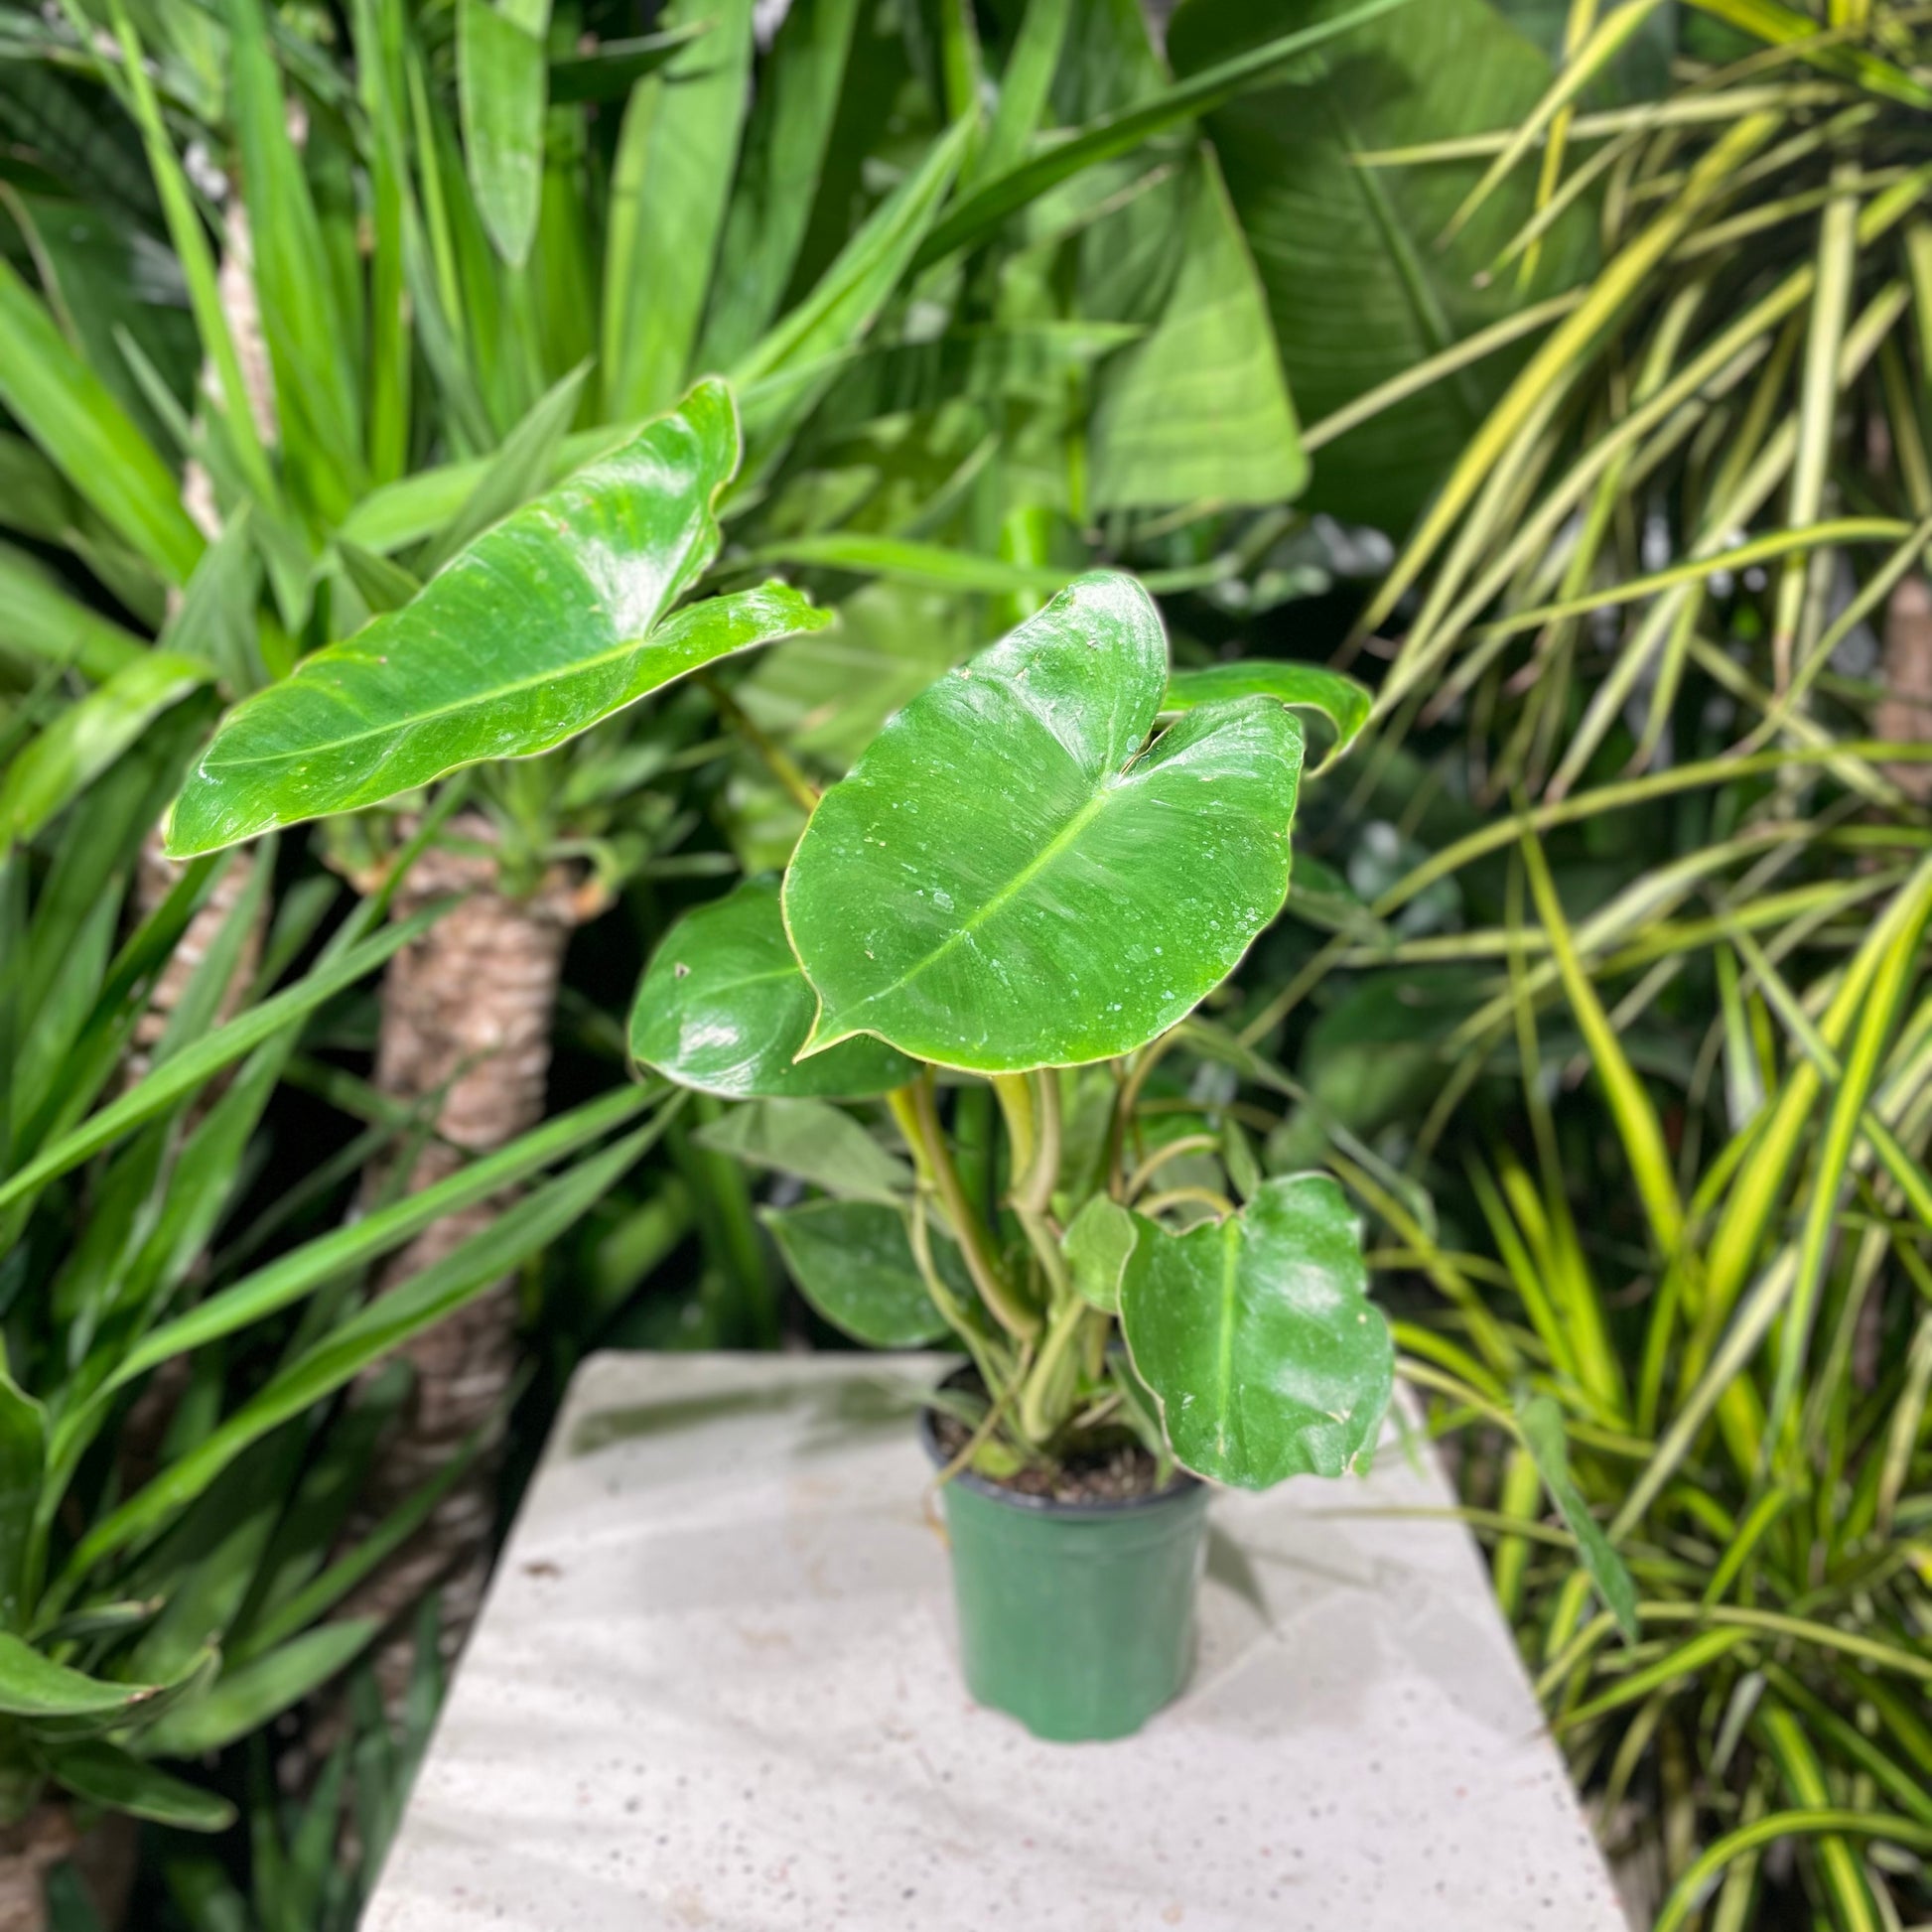 Burle Marxii Philodendron (Philodendron cordatum) in a 4 inch pot. Indoor plant for sale by Promise Supply for delivery and pickup in Toronto